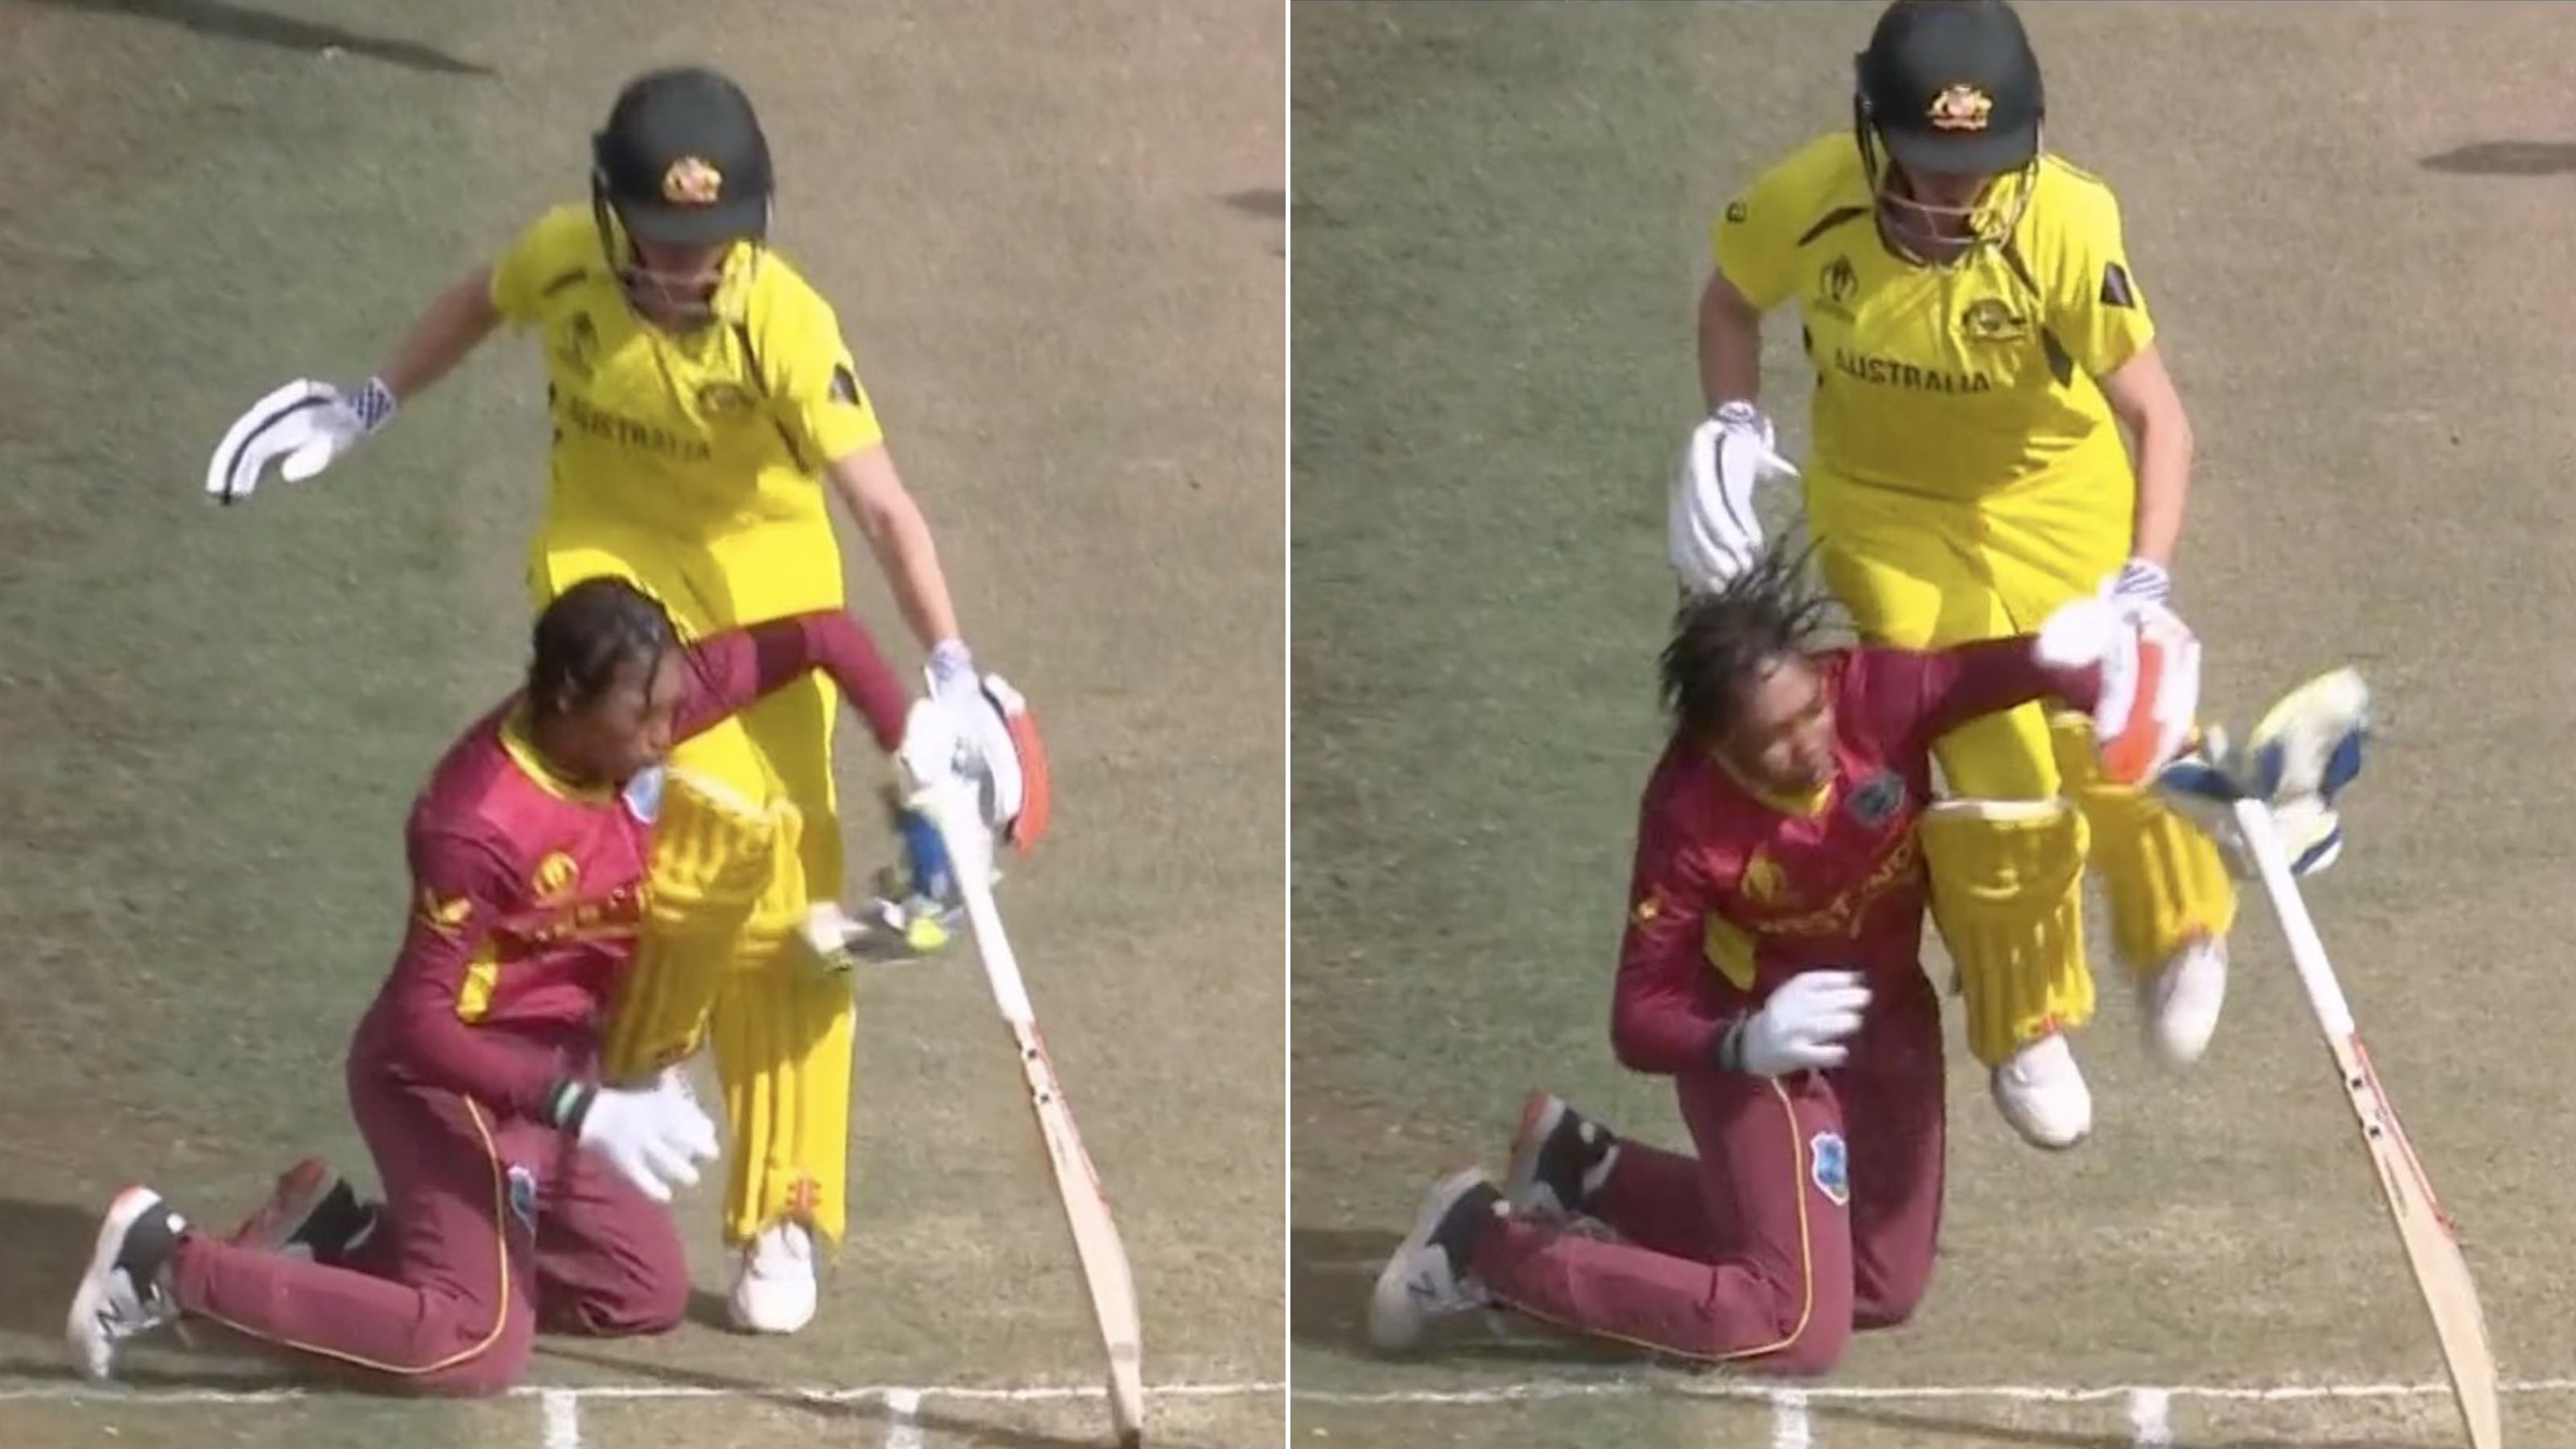 Beth Mooney involved in scary collision as Aussies rout West Indies at World Cup